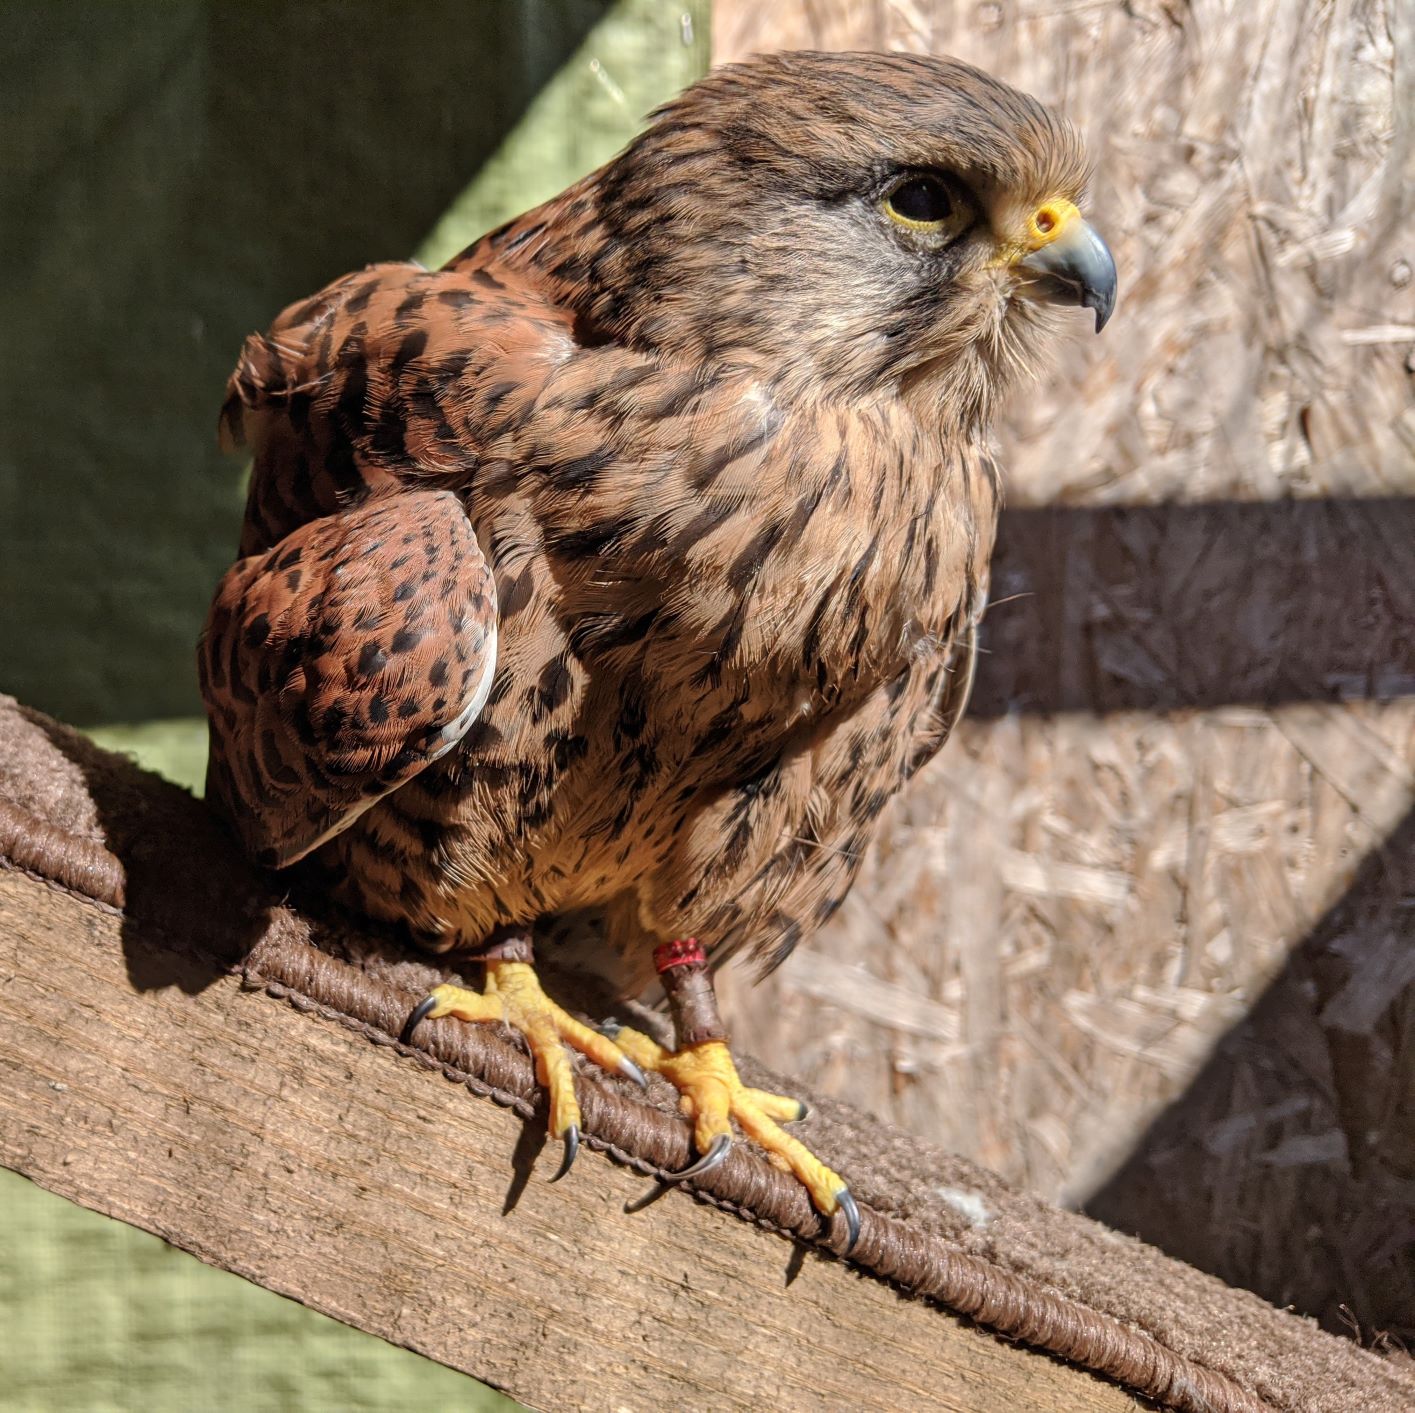 Chapter Six - The Life of an Extraordinary Kestrel - The End